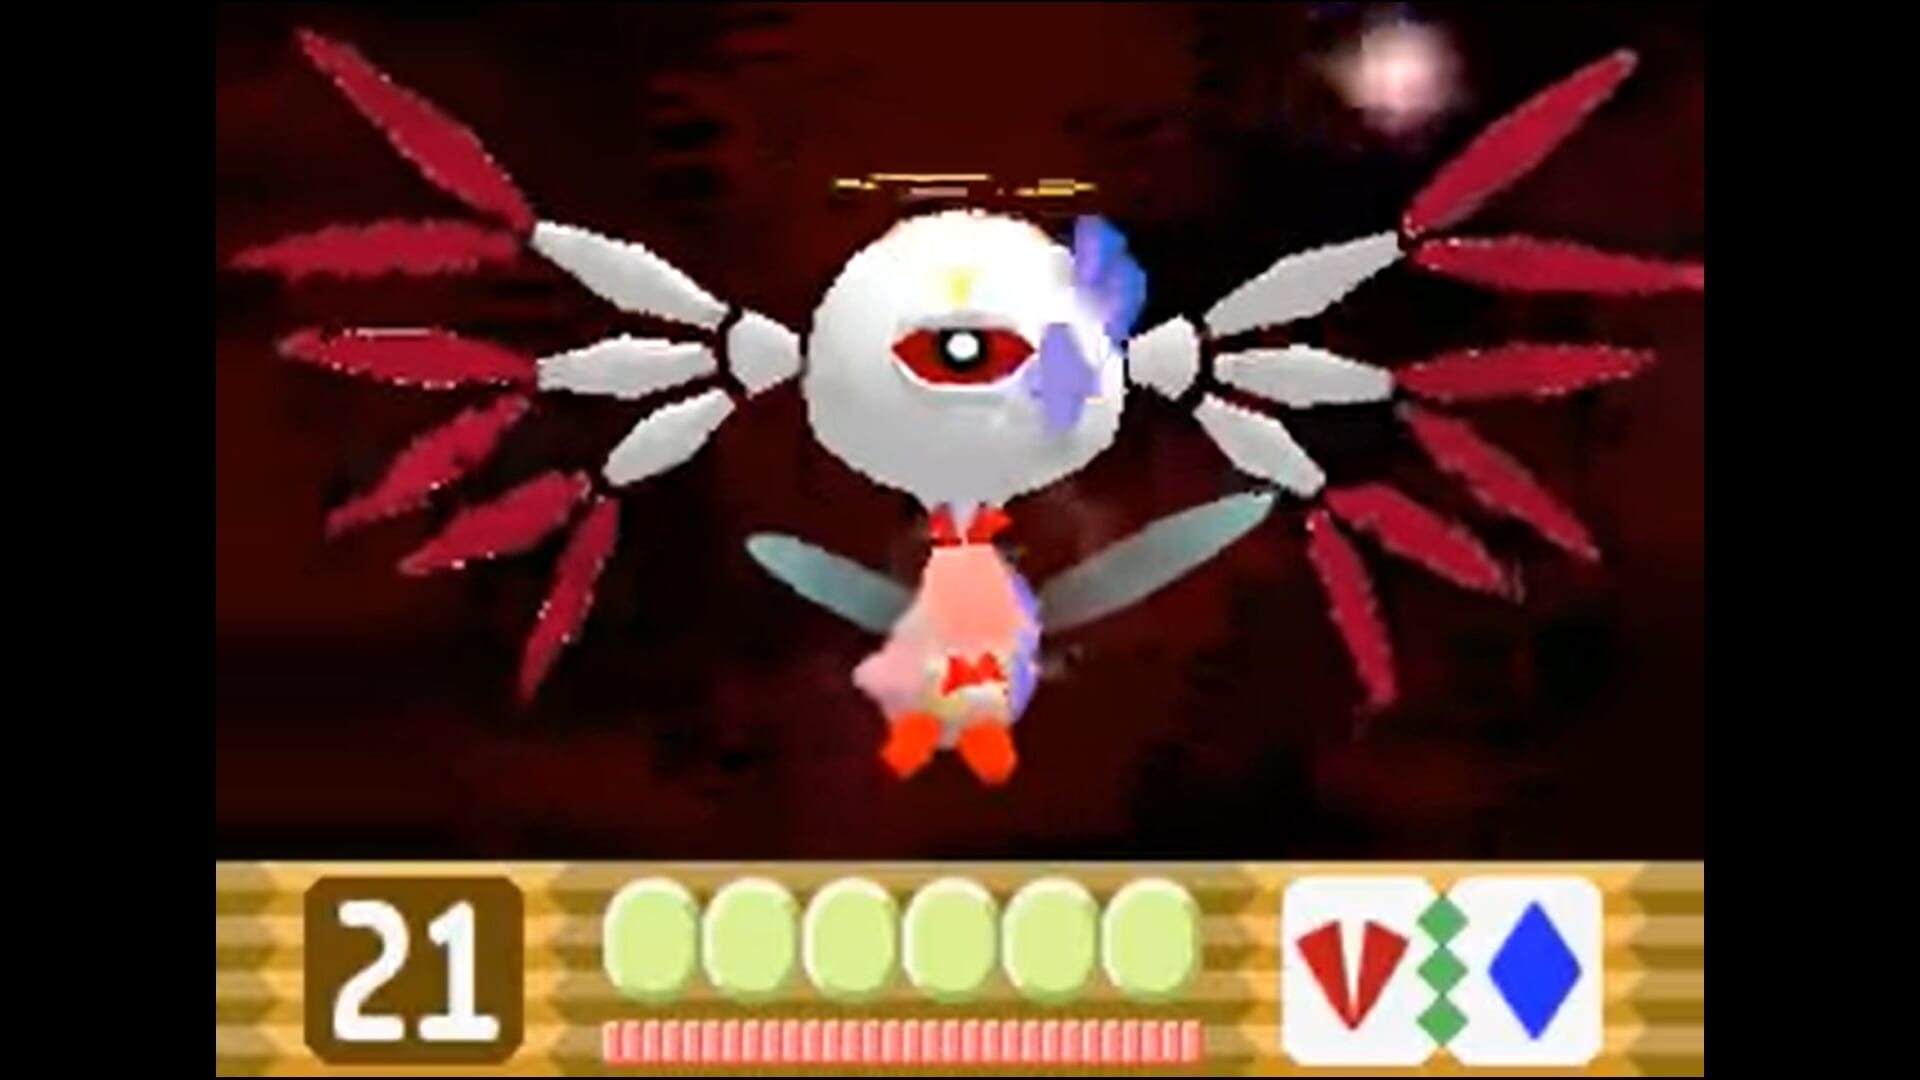 Kirby faces down a white, angelic creature with a single red